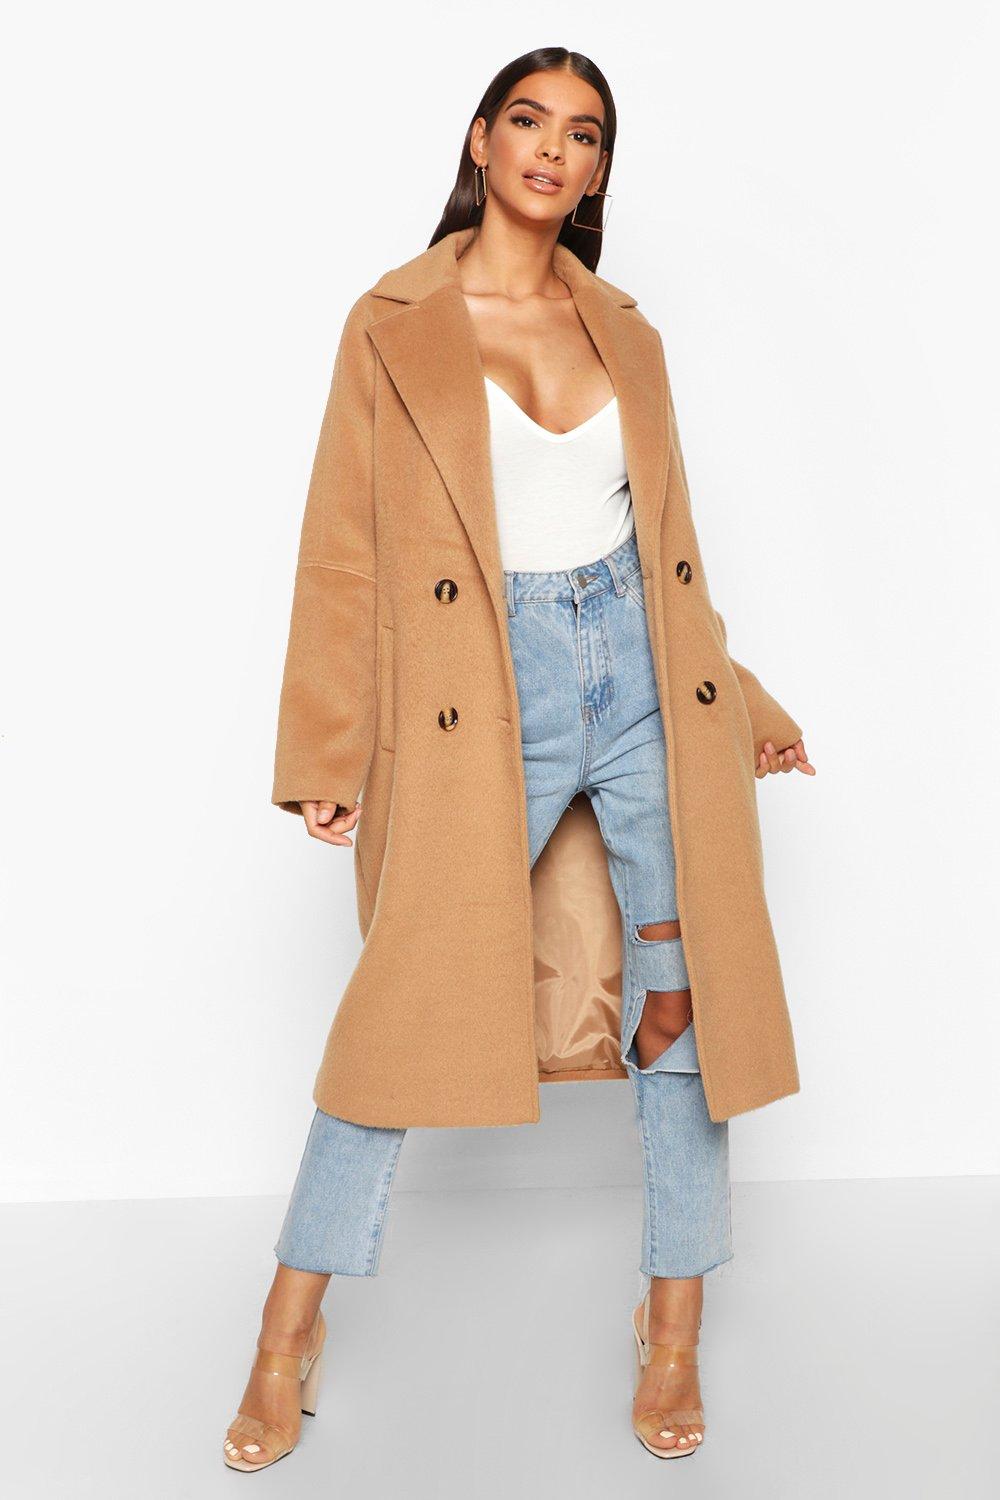 Image result for Brushed Double Breasted Wool Look Coat https://www.boohoo.com/brushed-double-breasted-wool-look-coat/FZZ91087.html Product code: FZZ91087